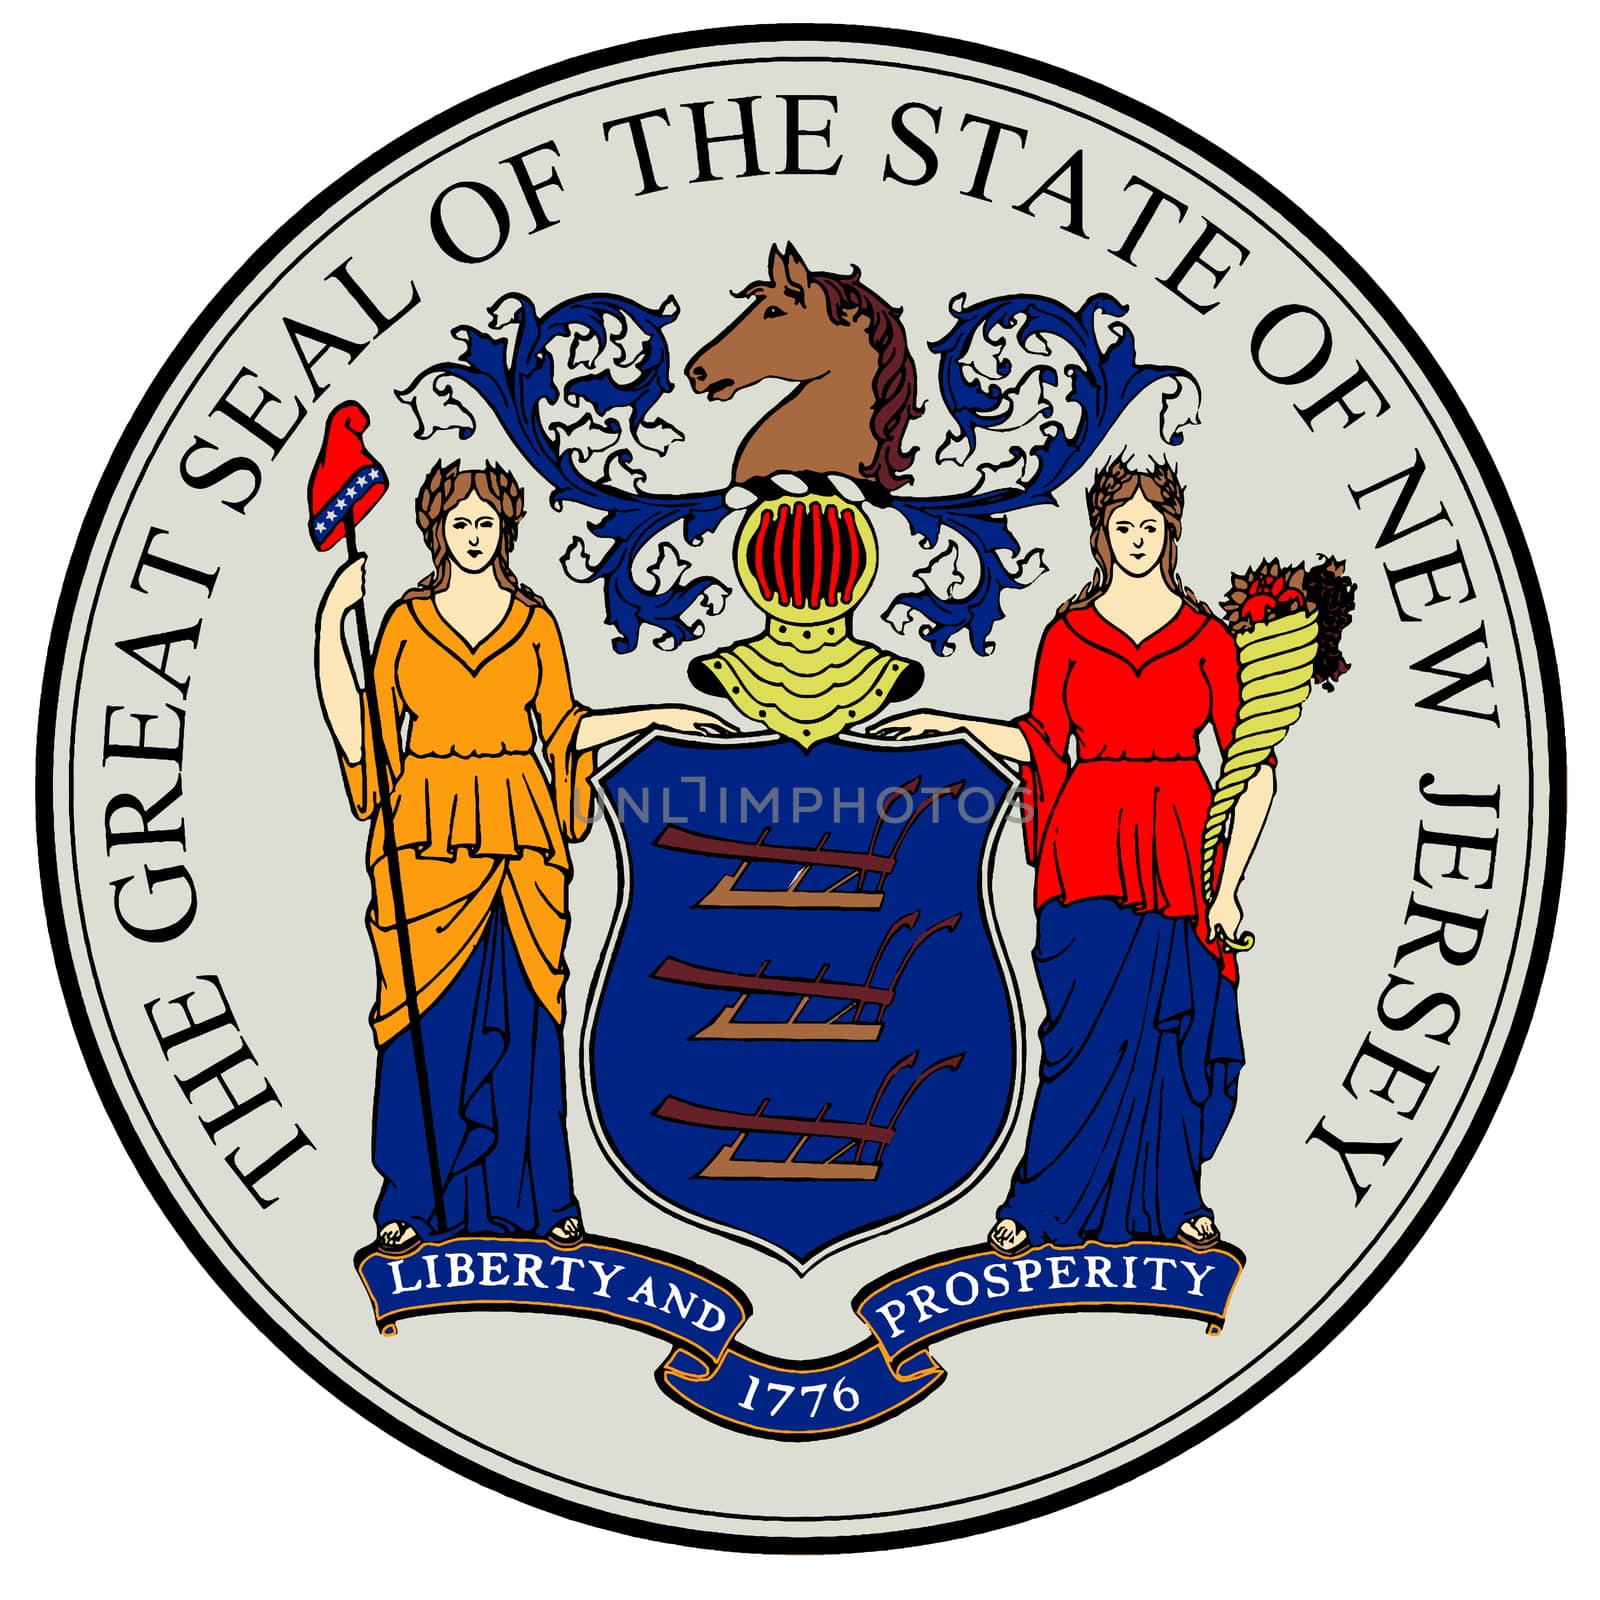 The great seal of the state of New Jersey isolated on a white background